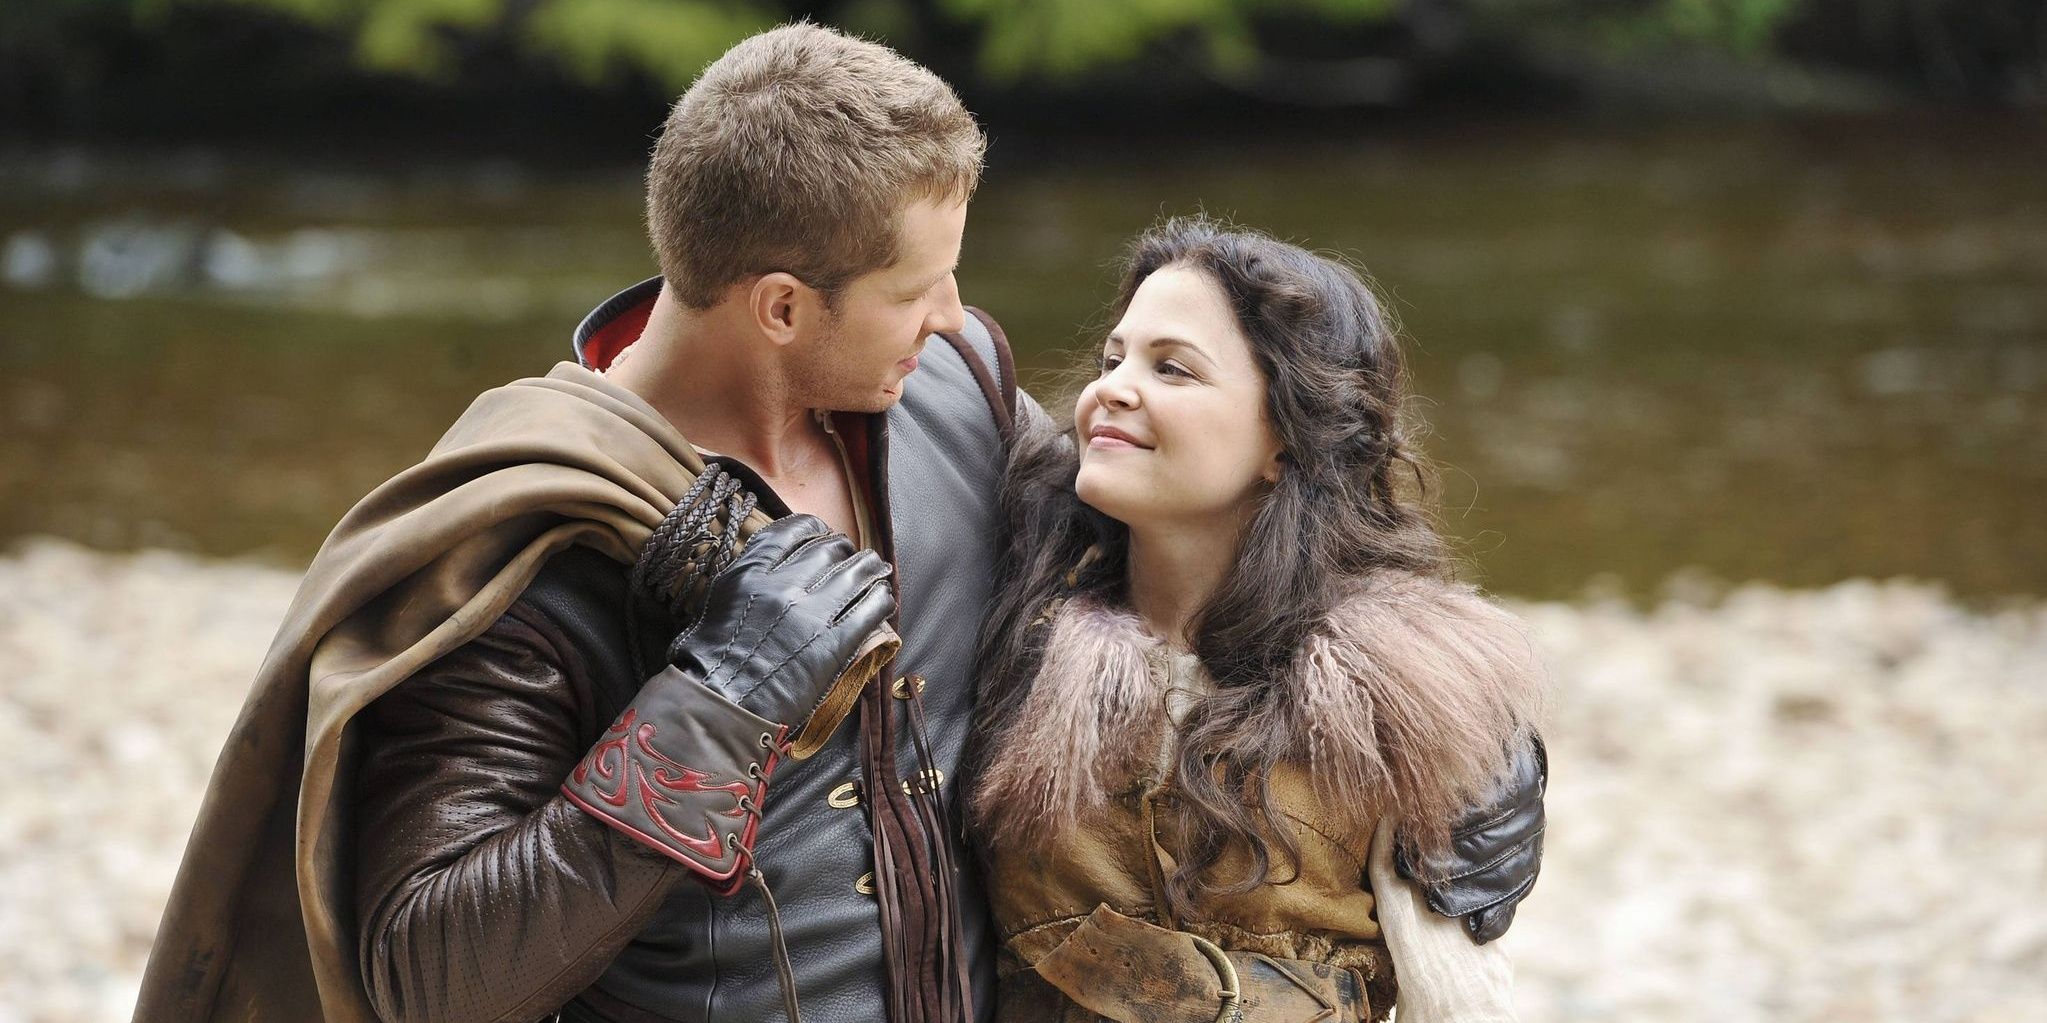 Realistic Snow White And Prince Charming's Relationship